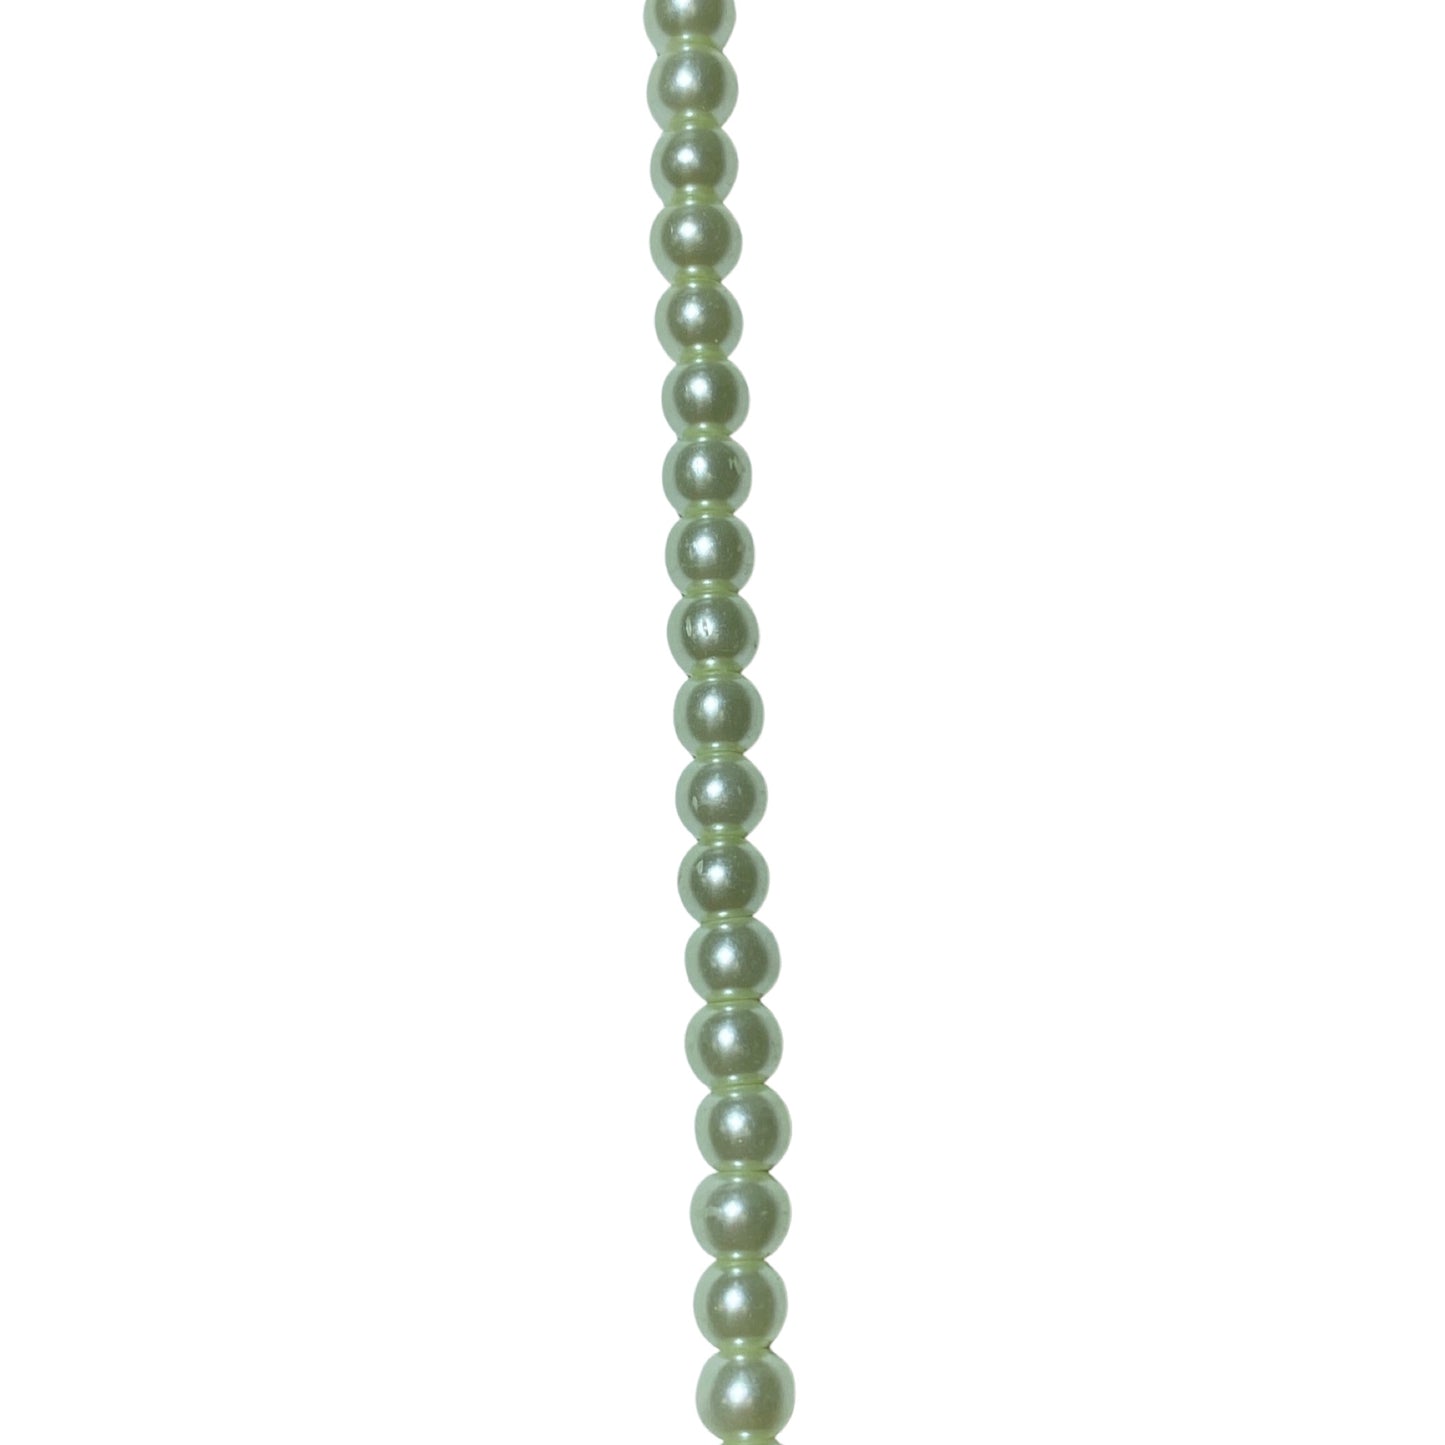 4mm Glass Pearl - Round/ Smooth